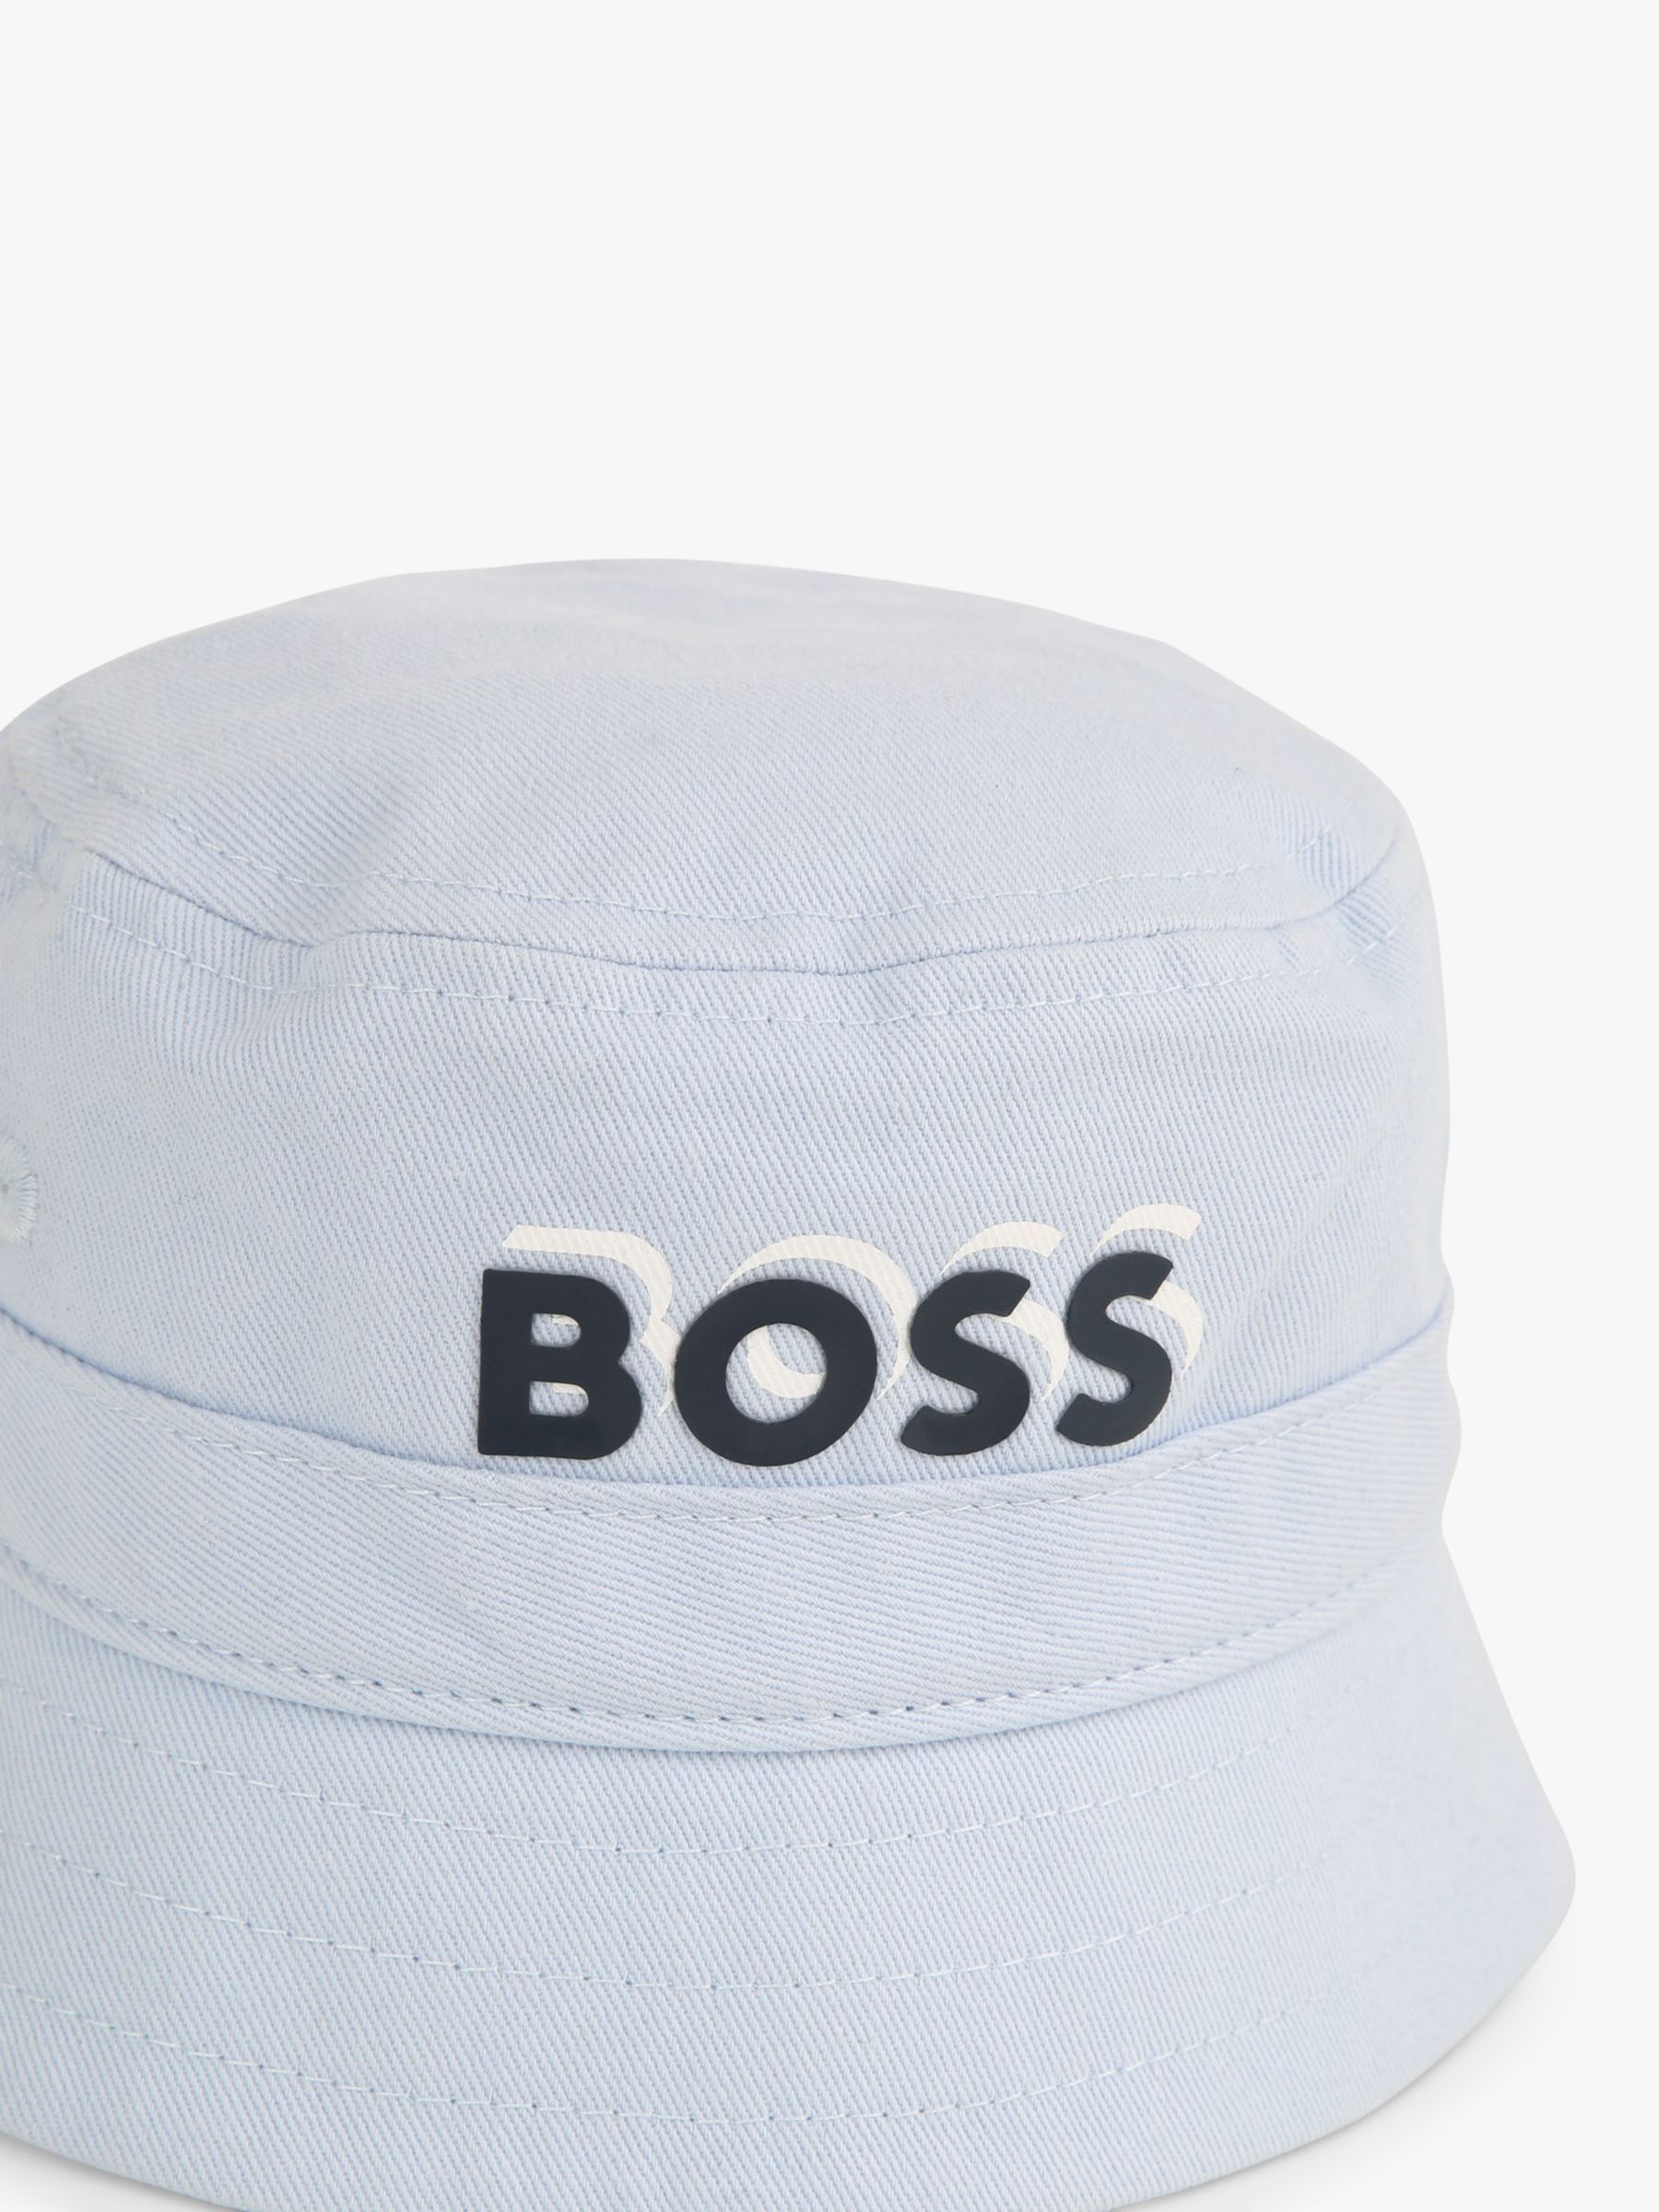 Buy BOSS Baby Logo Embroidered Bucket Hat, Light Blue Online at johnlewis.com